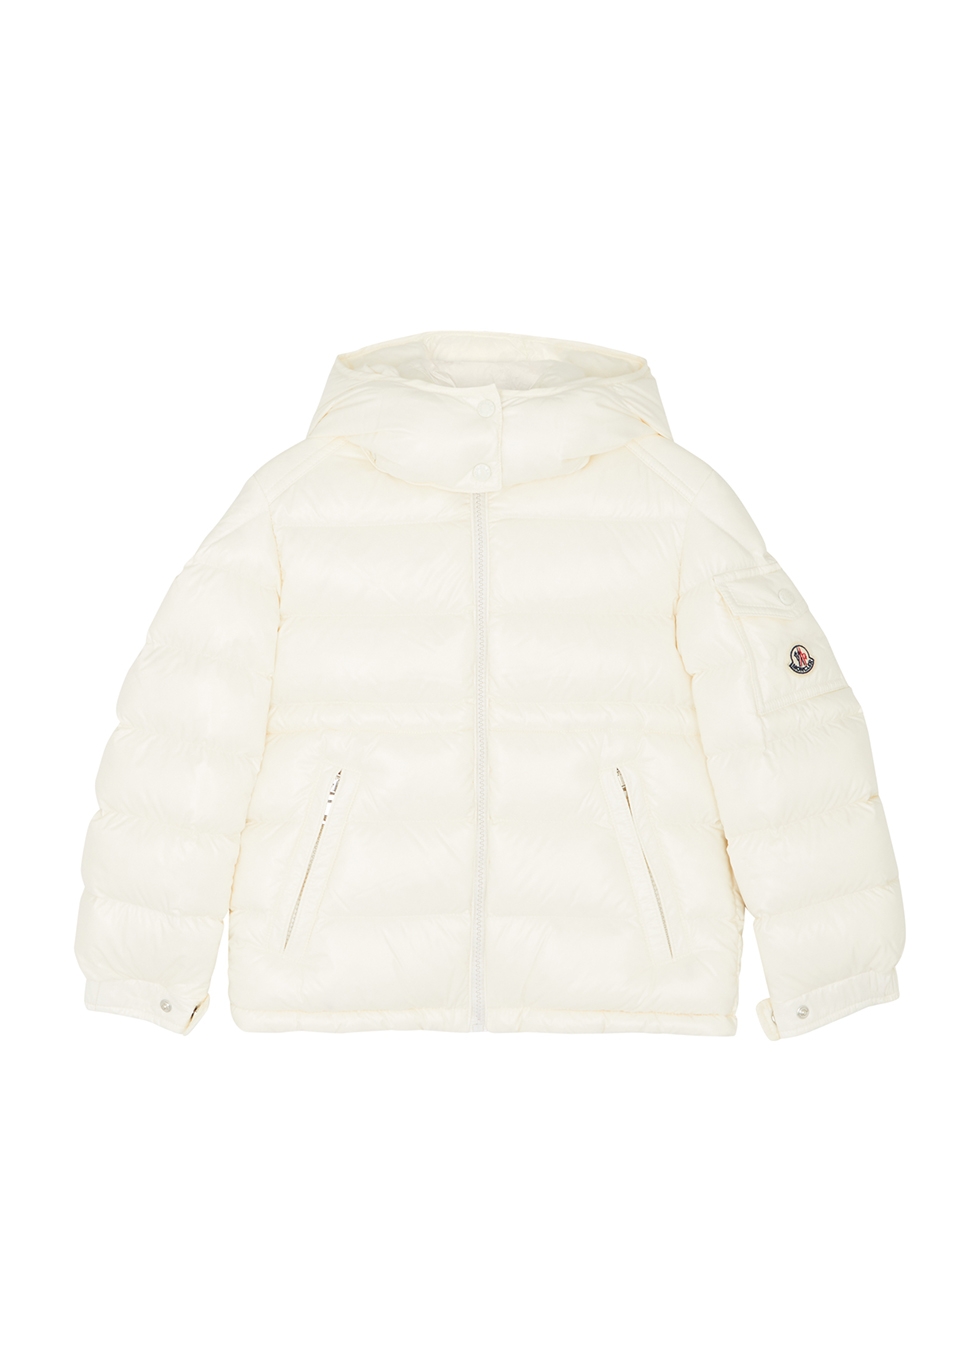 Moncler KIDS Maire cream quilted shell jacket (6 years) - Harvey Nichols